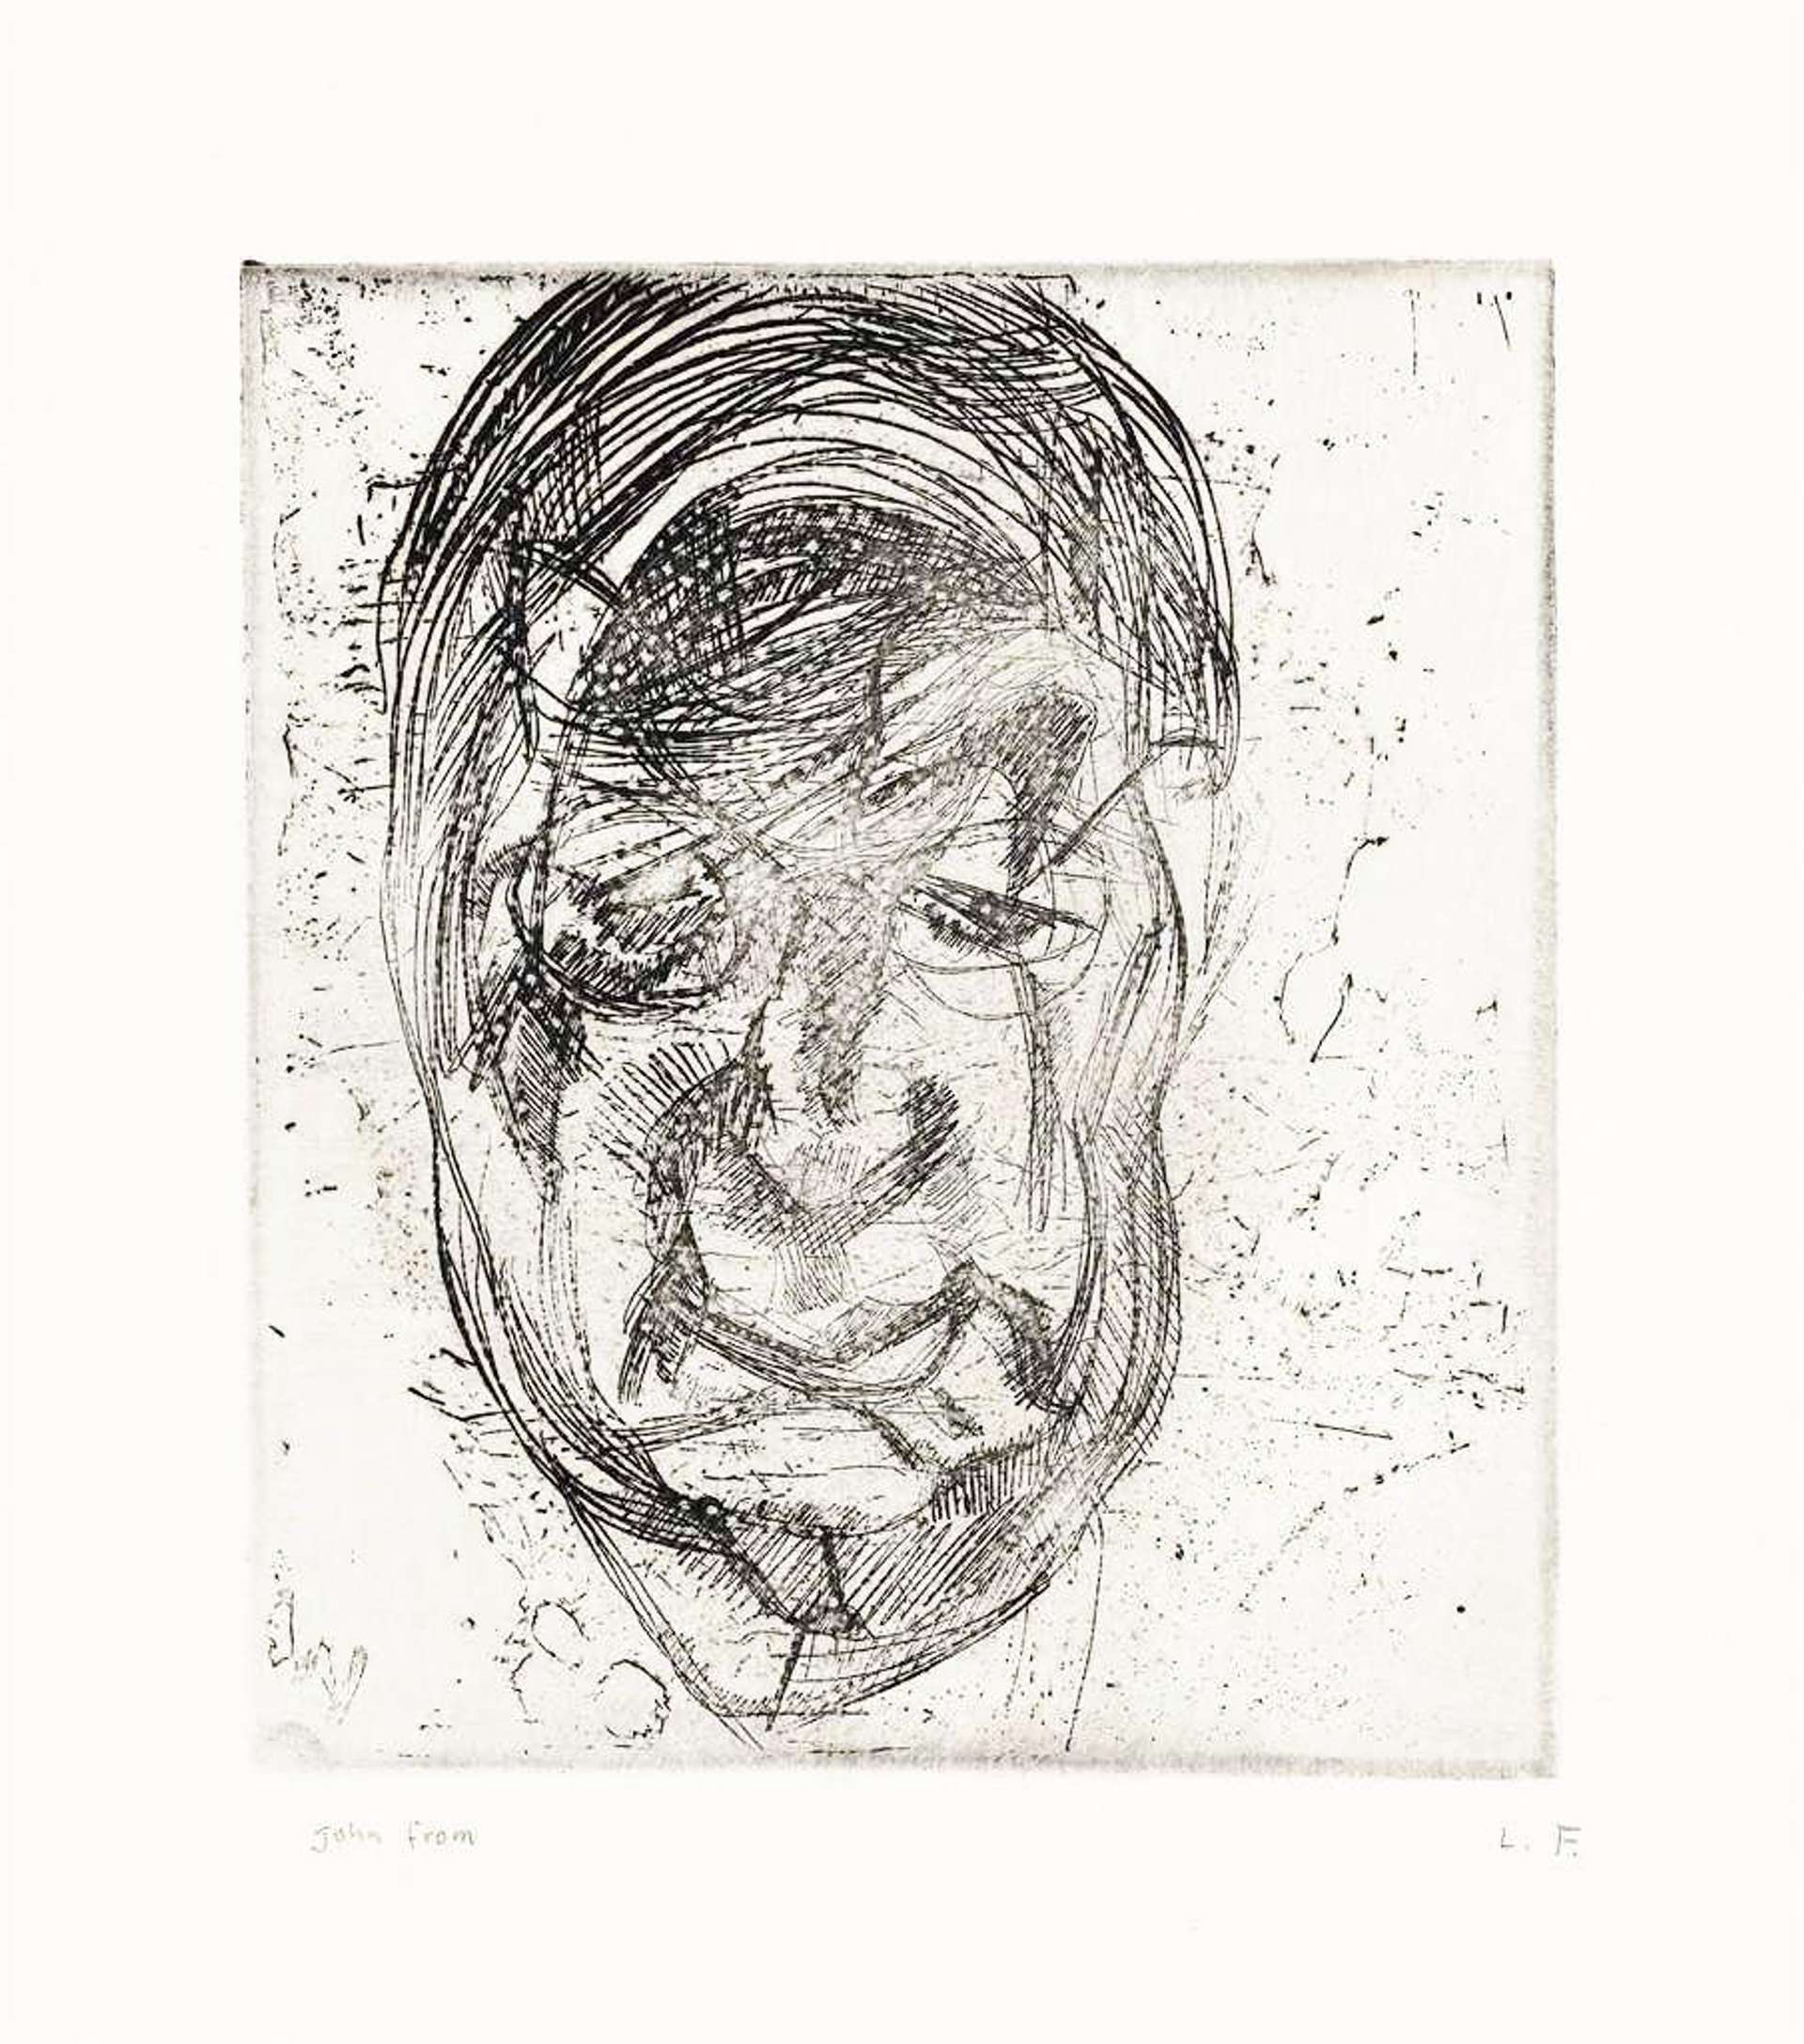 Lucian Freud: Lawrence Gowing (second version) - Signed Print